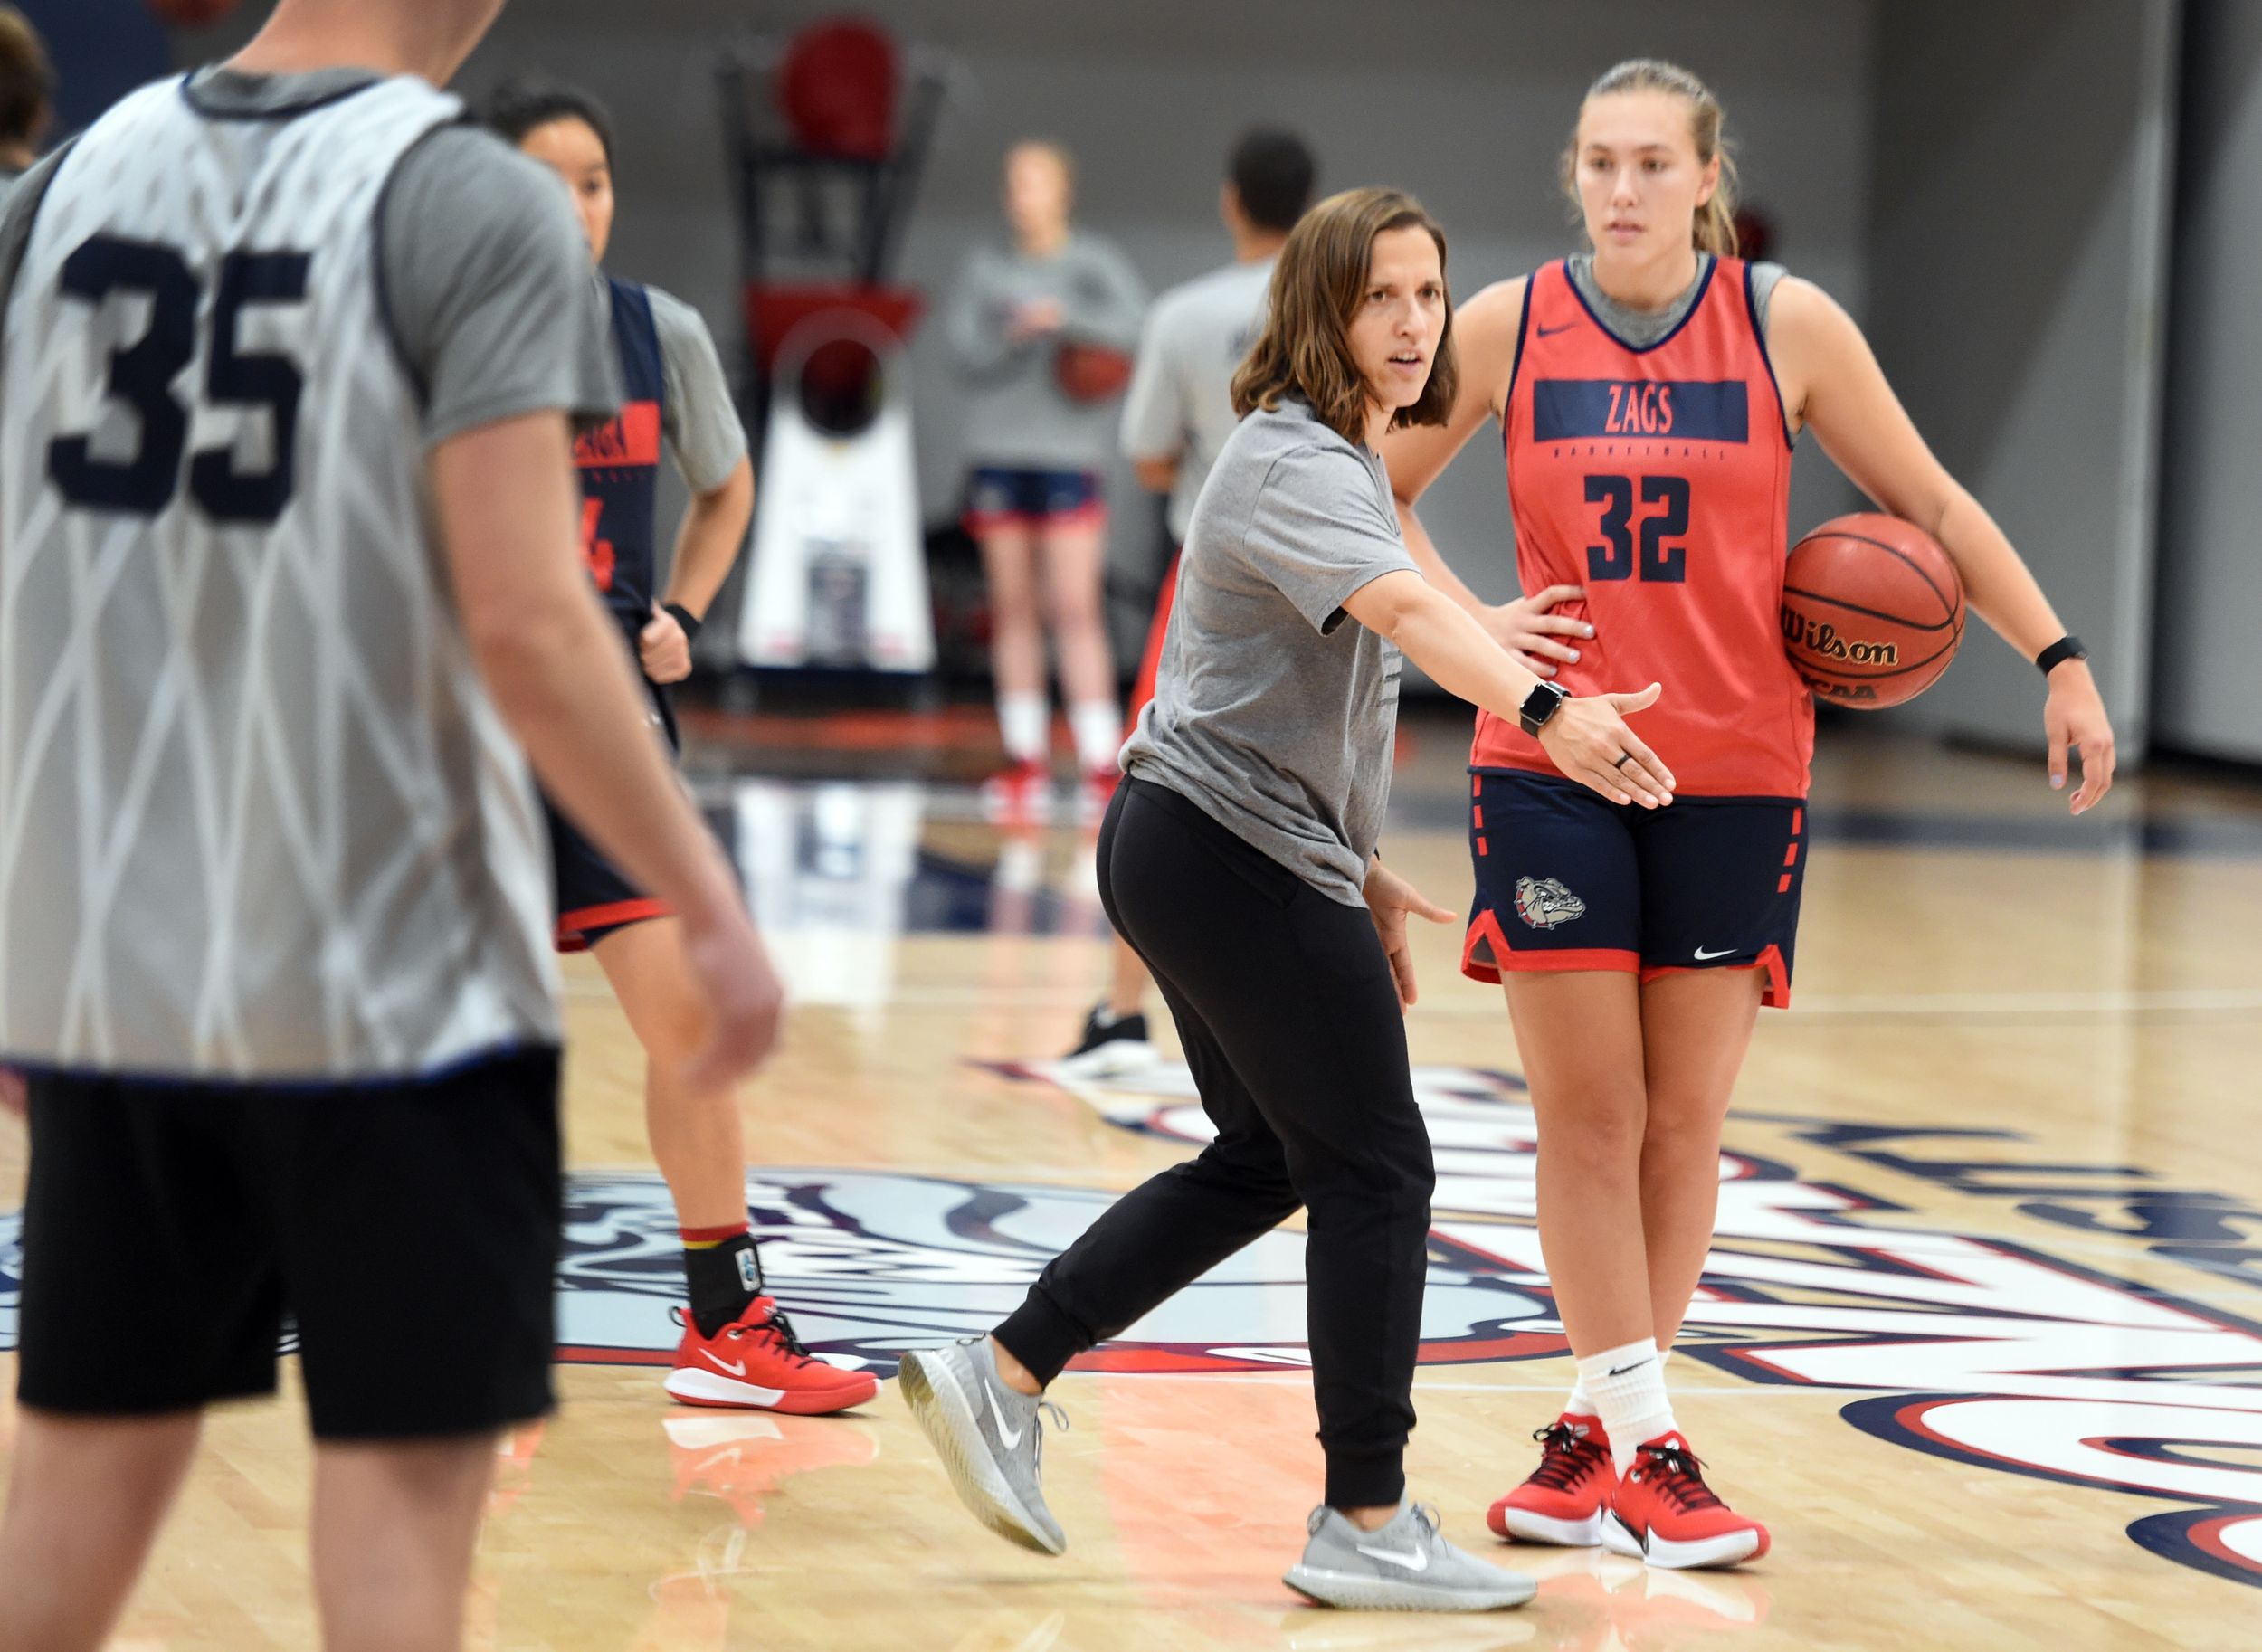 Gonzaga women’s basketball owes ampedup recruiting to blooming culture